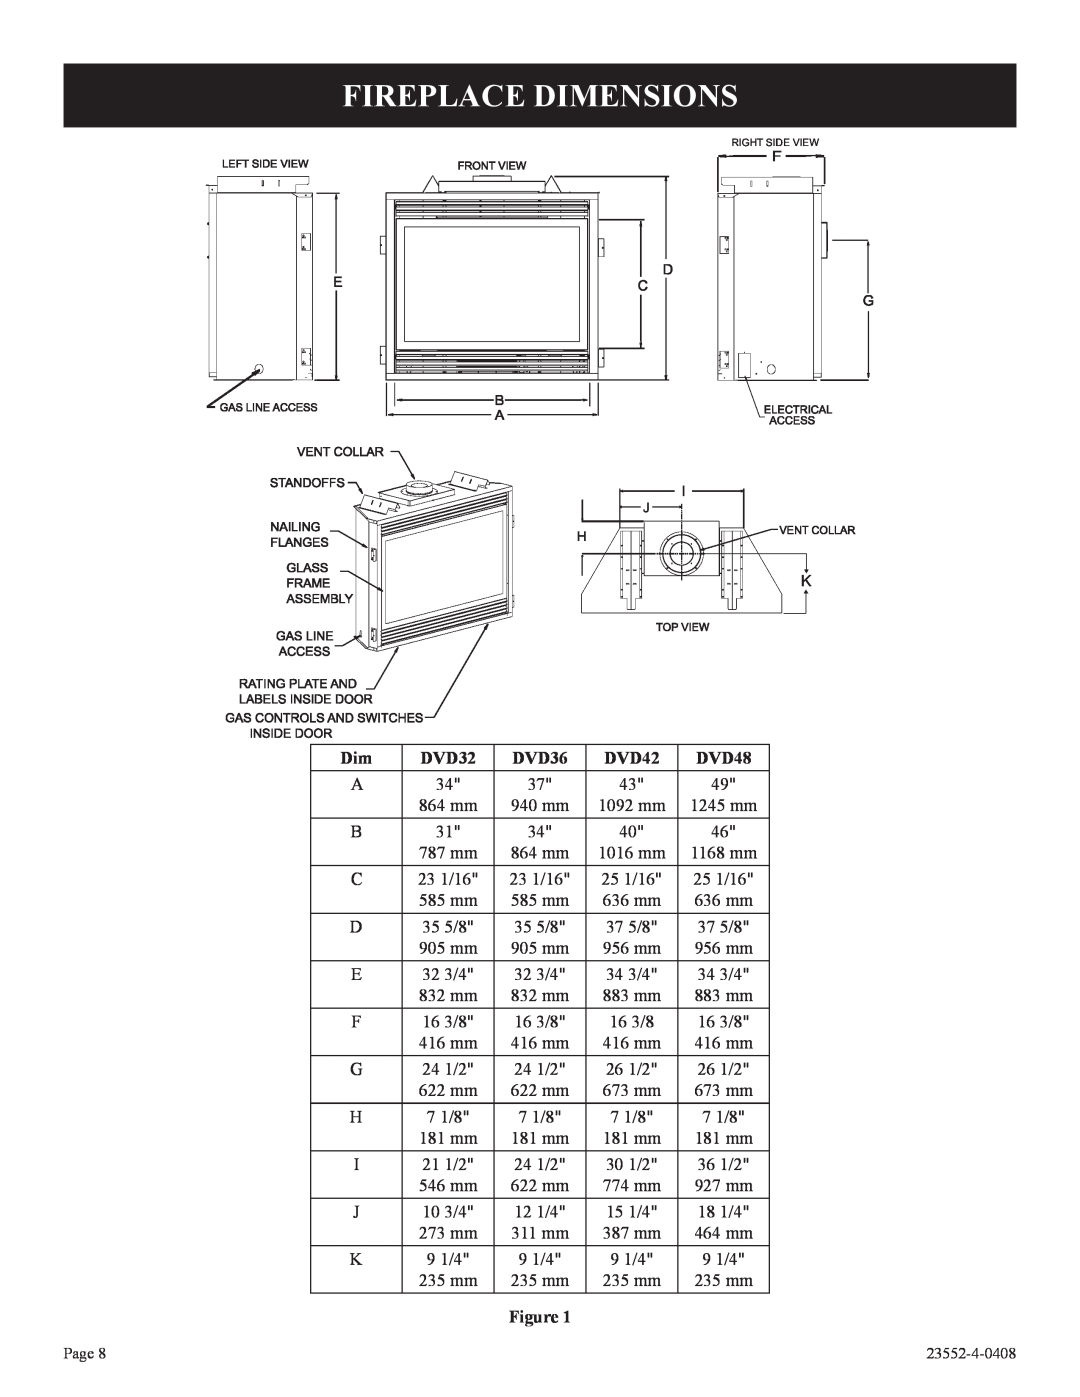 Empire Comfort Systems 1, DVD32FP3, 3)(N installation instructions Fireplace Dimensions, DVD36, DVD42, DVD48 